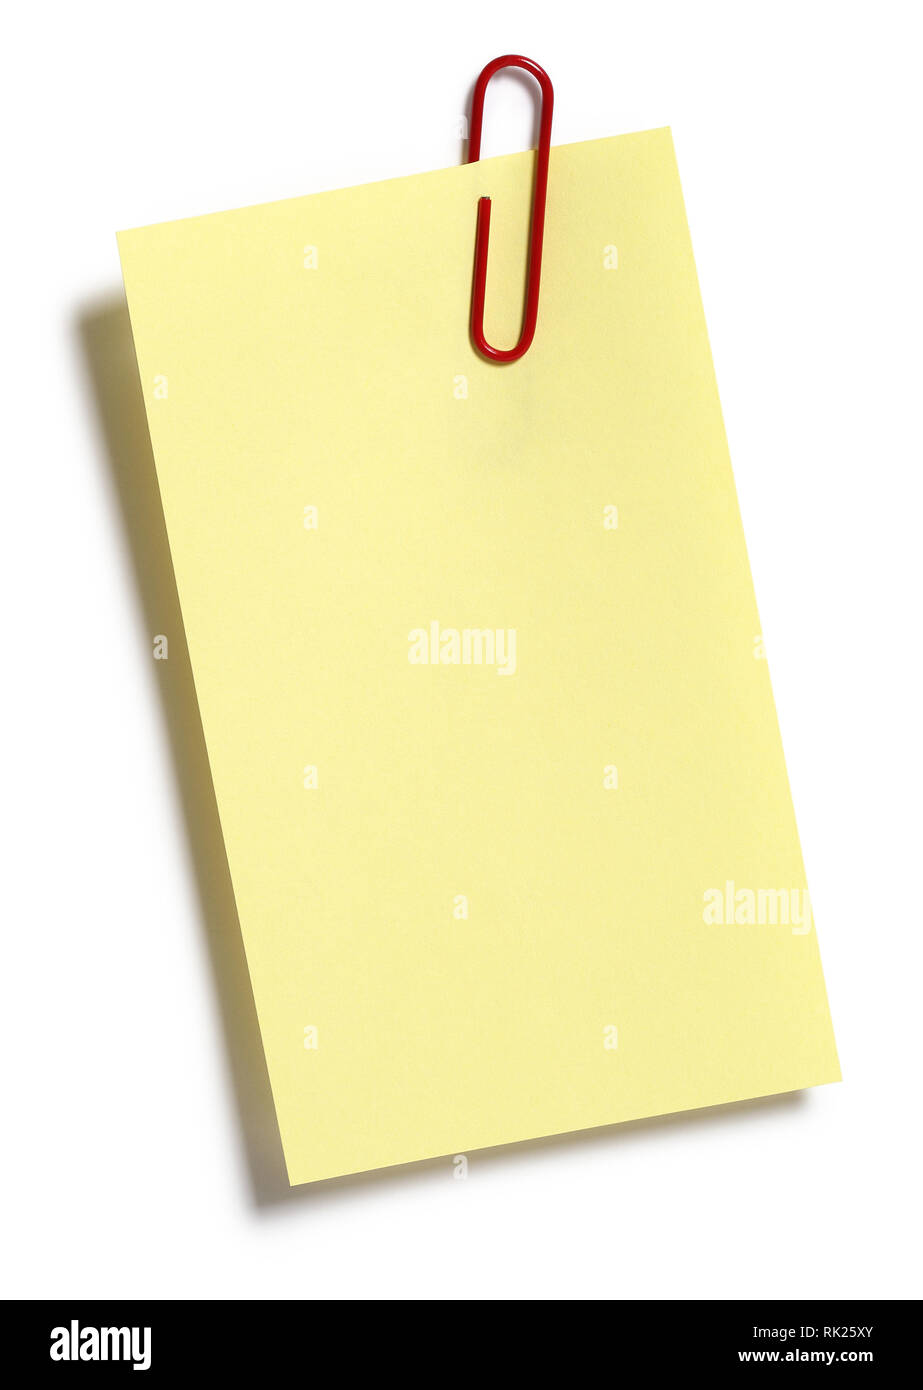 https://c8.alamy.com/comp/RK25XY/note-paper-isolated-on-white-background-RK25XY.jpg